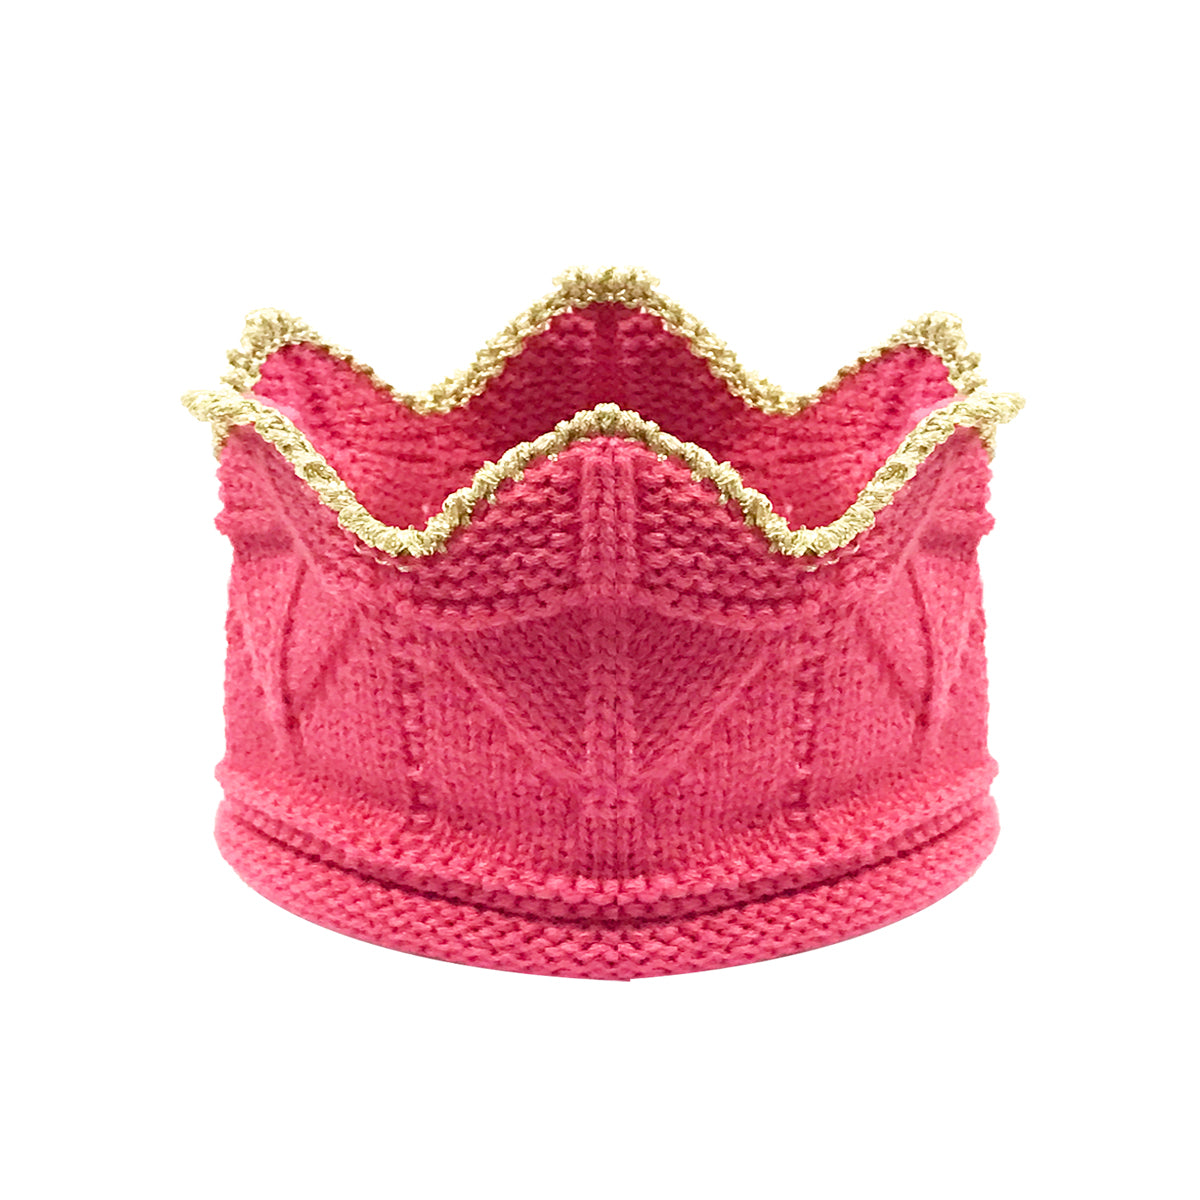 Wrapables Baby Boy & Girl Birthday Party Crochet Knitted Crown Headband Hat with Gold Trim